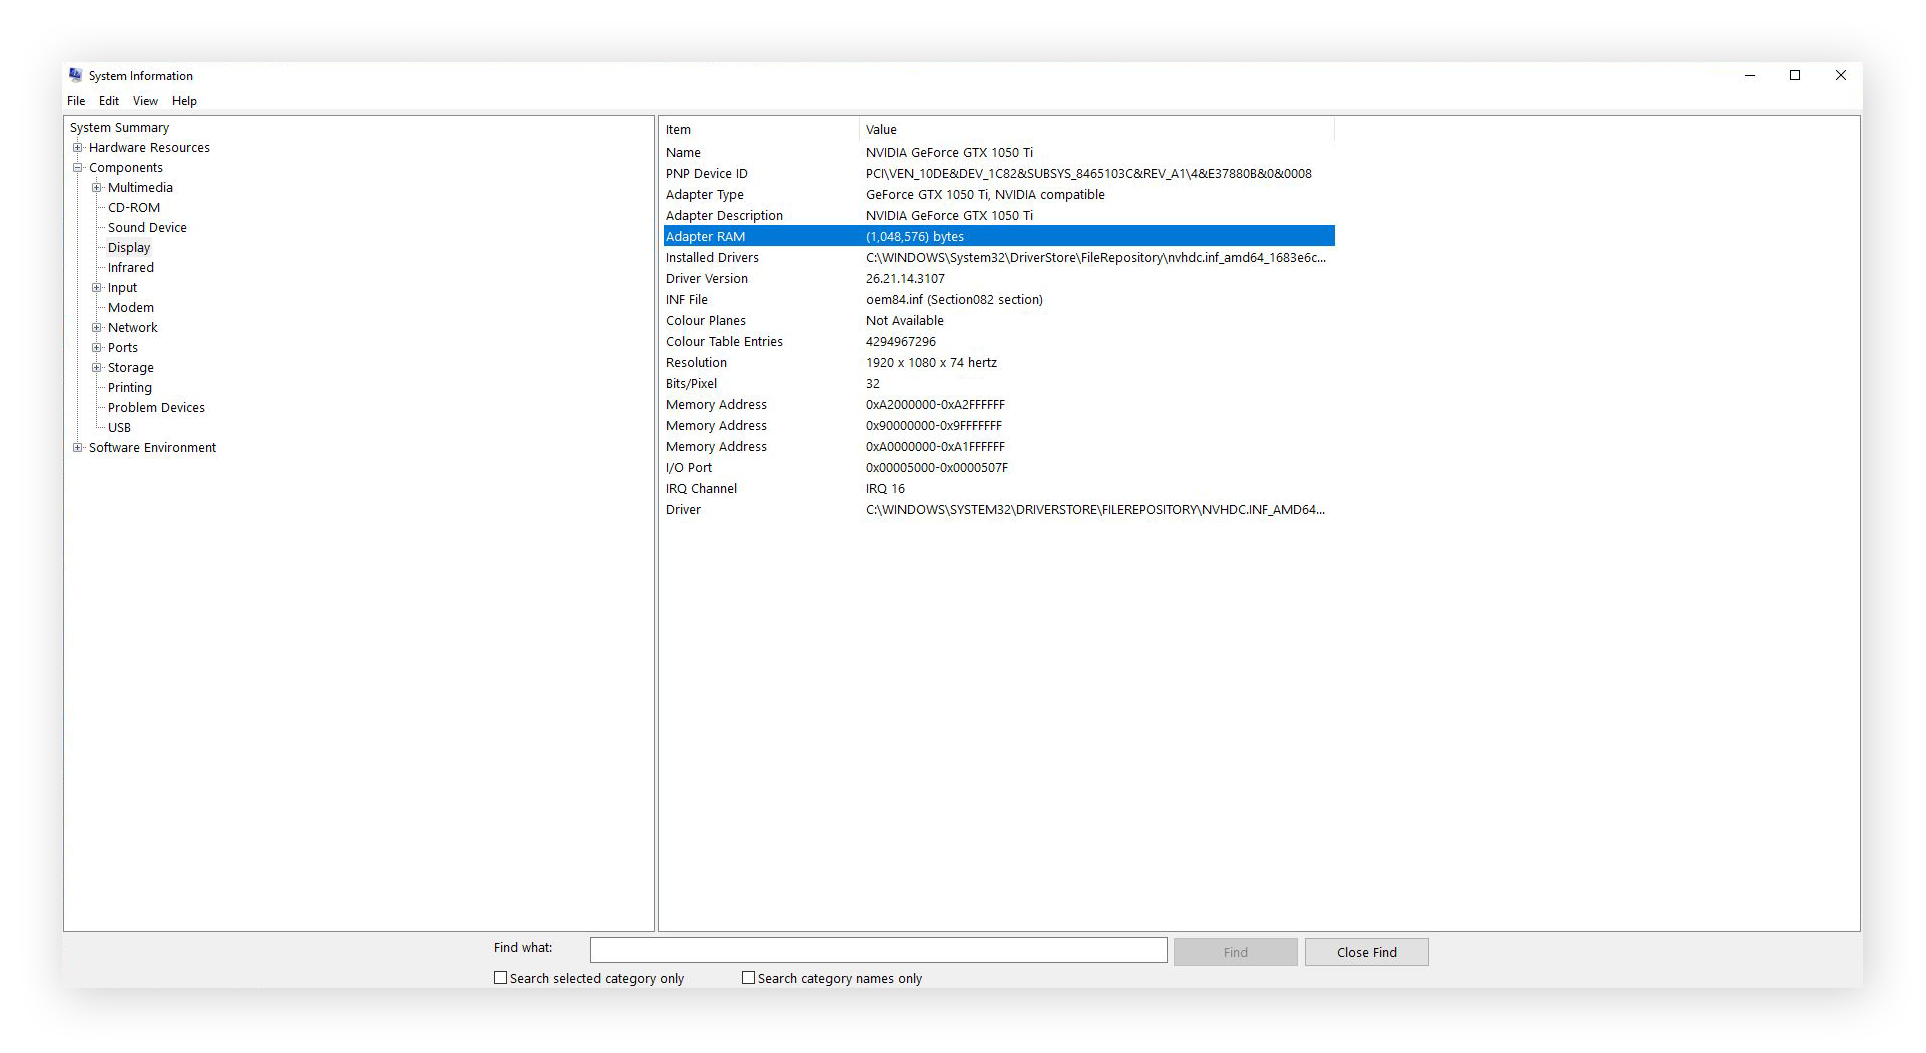 Full details of my graphics card listed within the Display summary of Windows System Information.